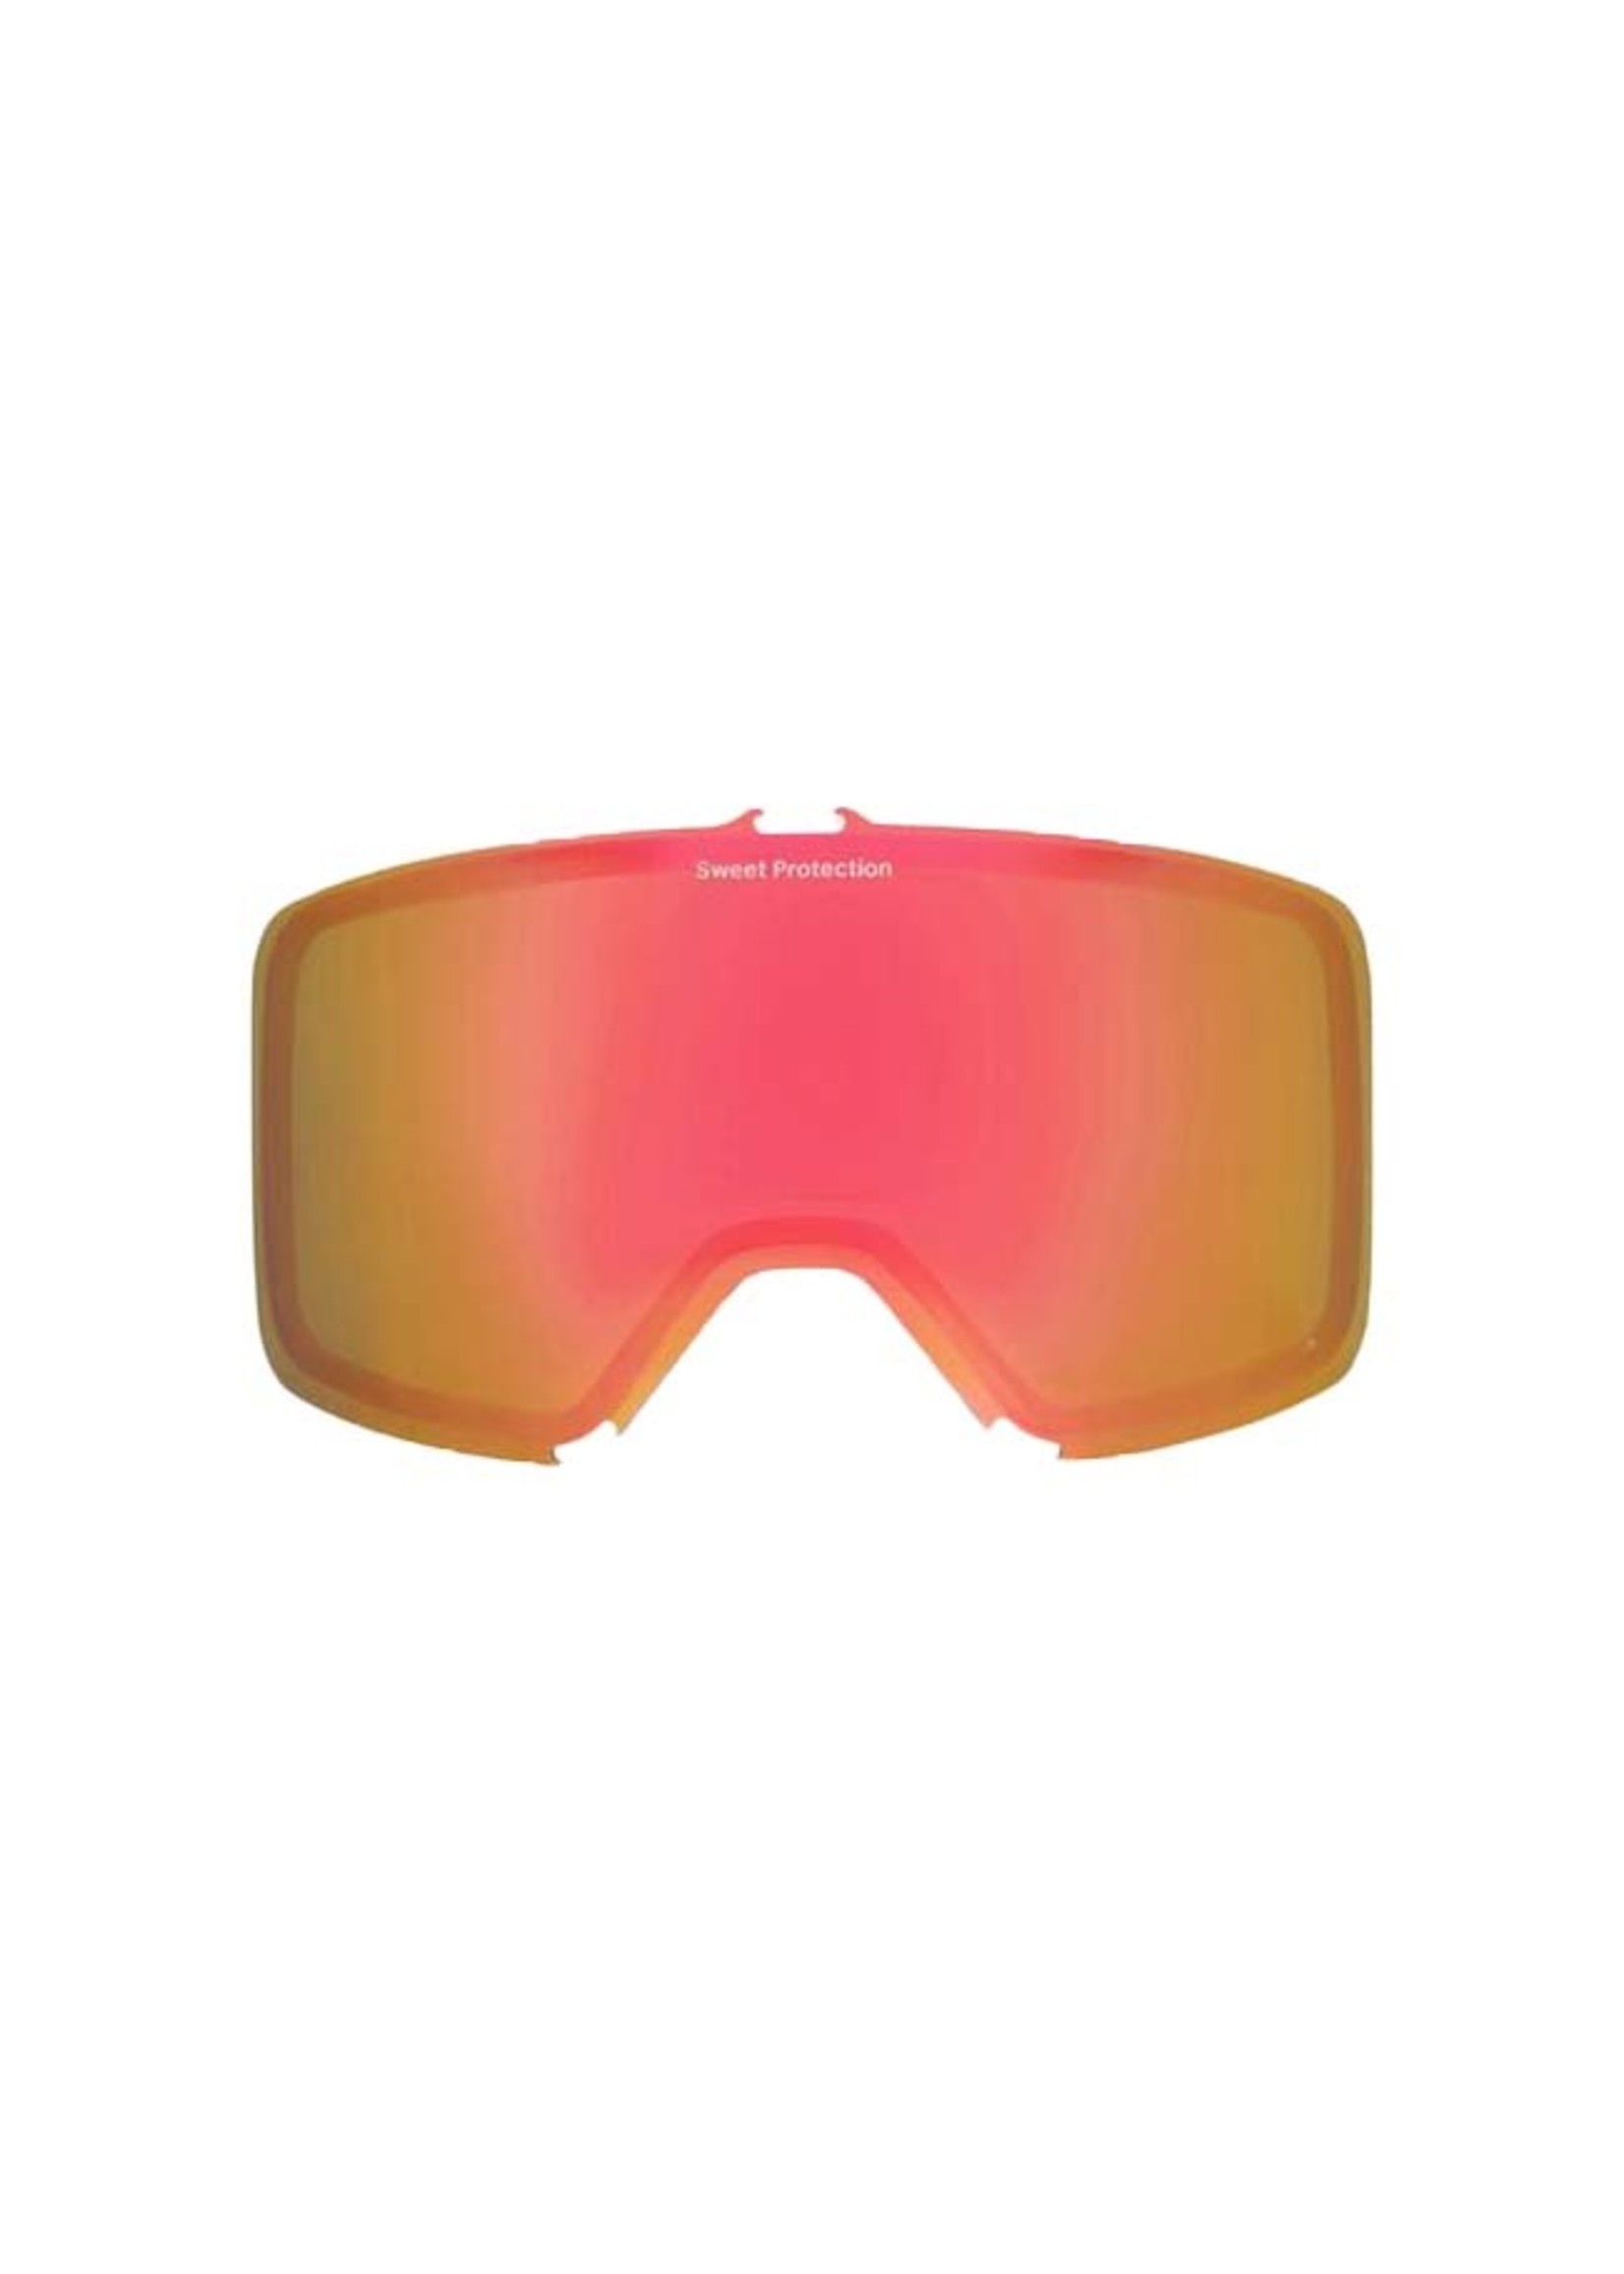 Sweet Protection Replacement Lens Bike Goggle Firewall